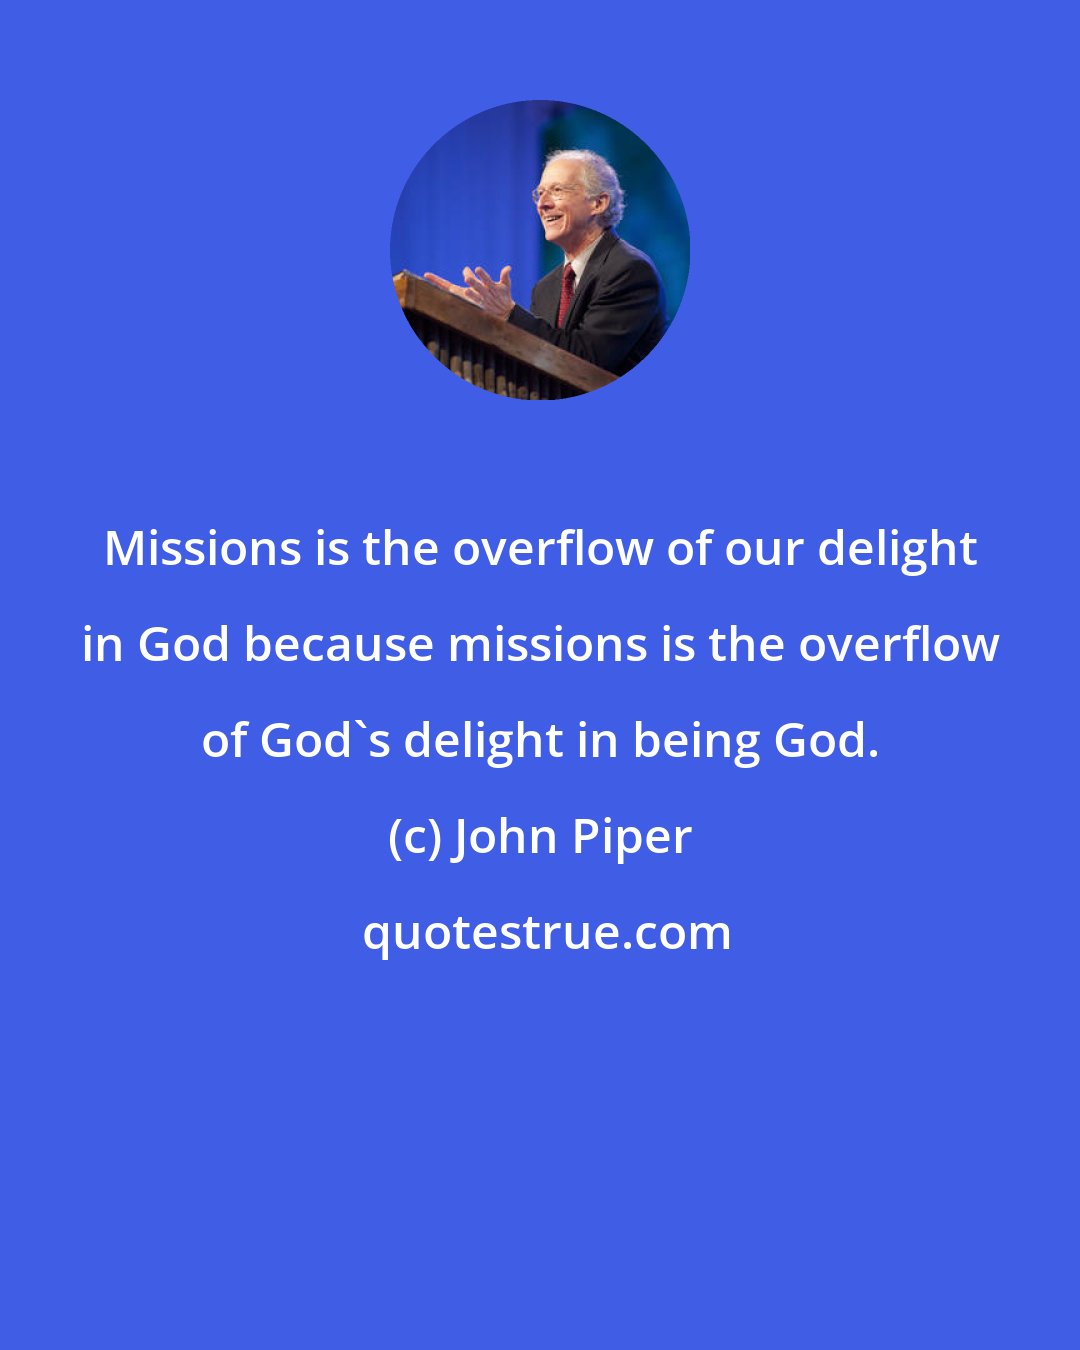 John Piper: Missions is the overflow of our delight in God because missions is the overflow of God's delight in being God.